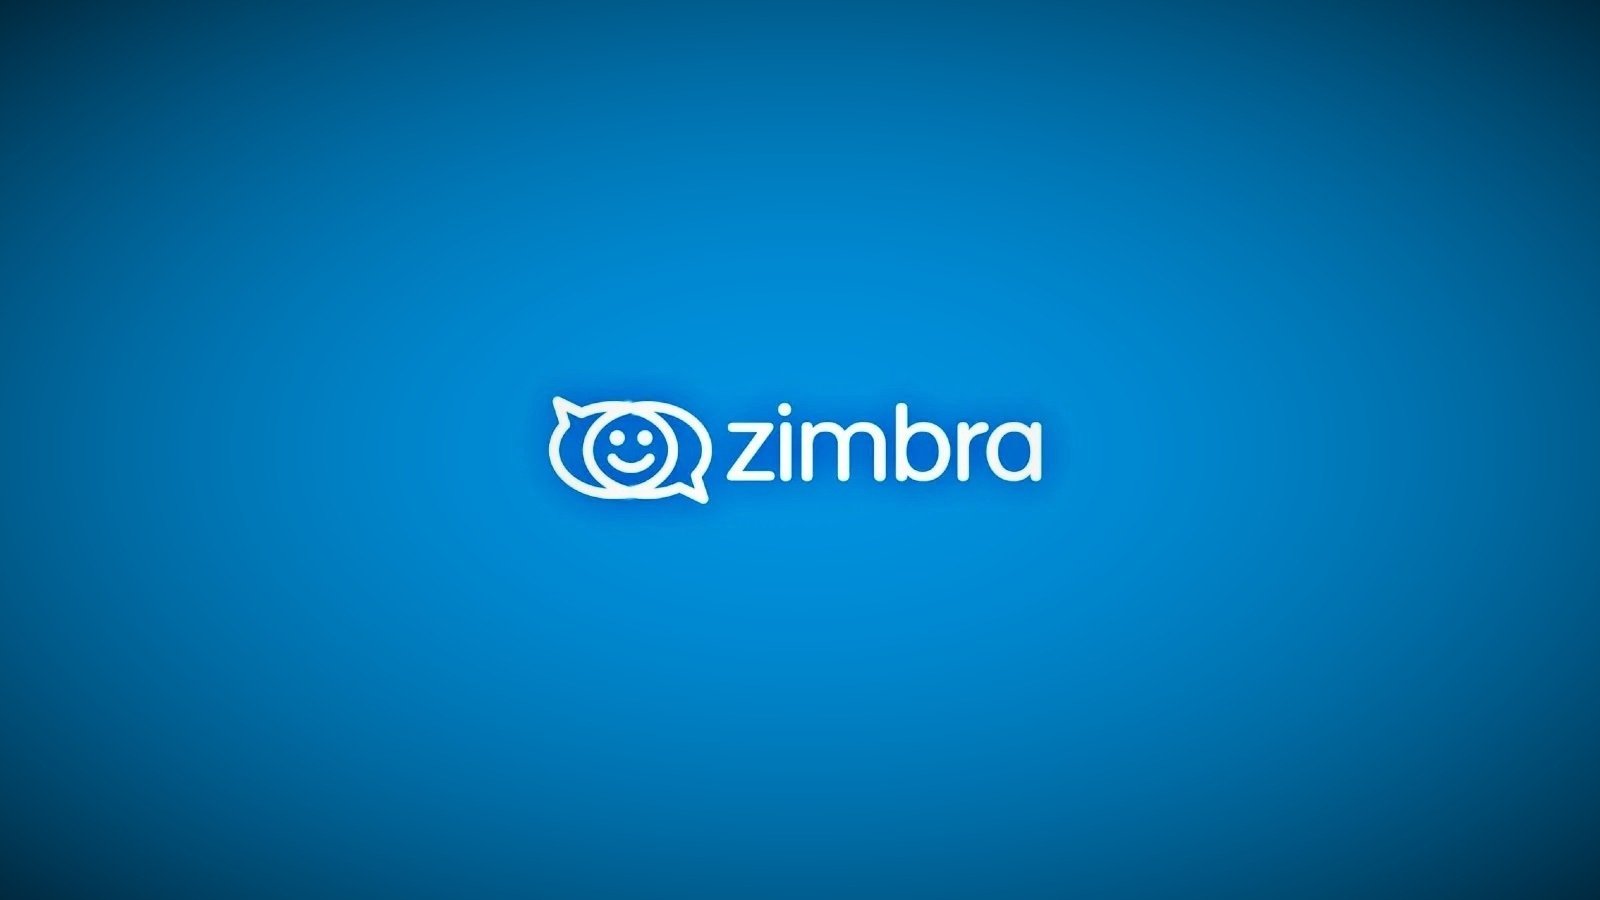 Zimbra urges customers to manually fix actively exploited zero-day reported by Google TAG